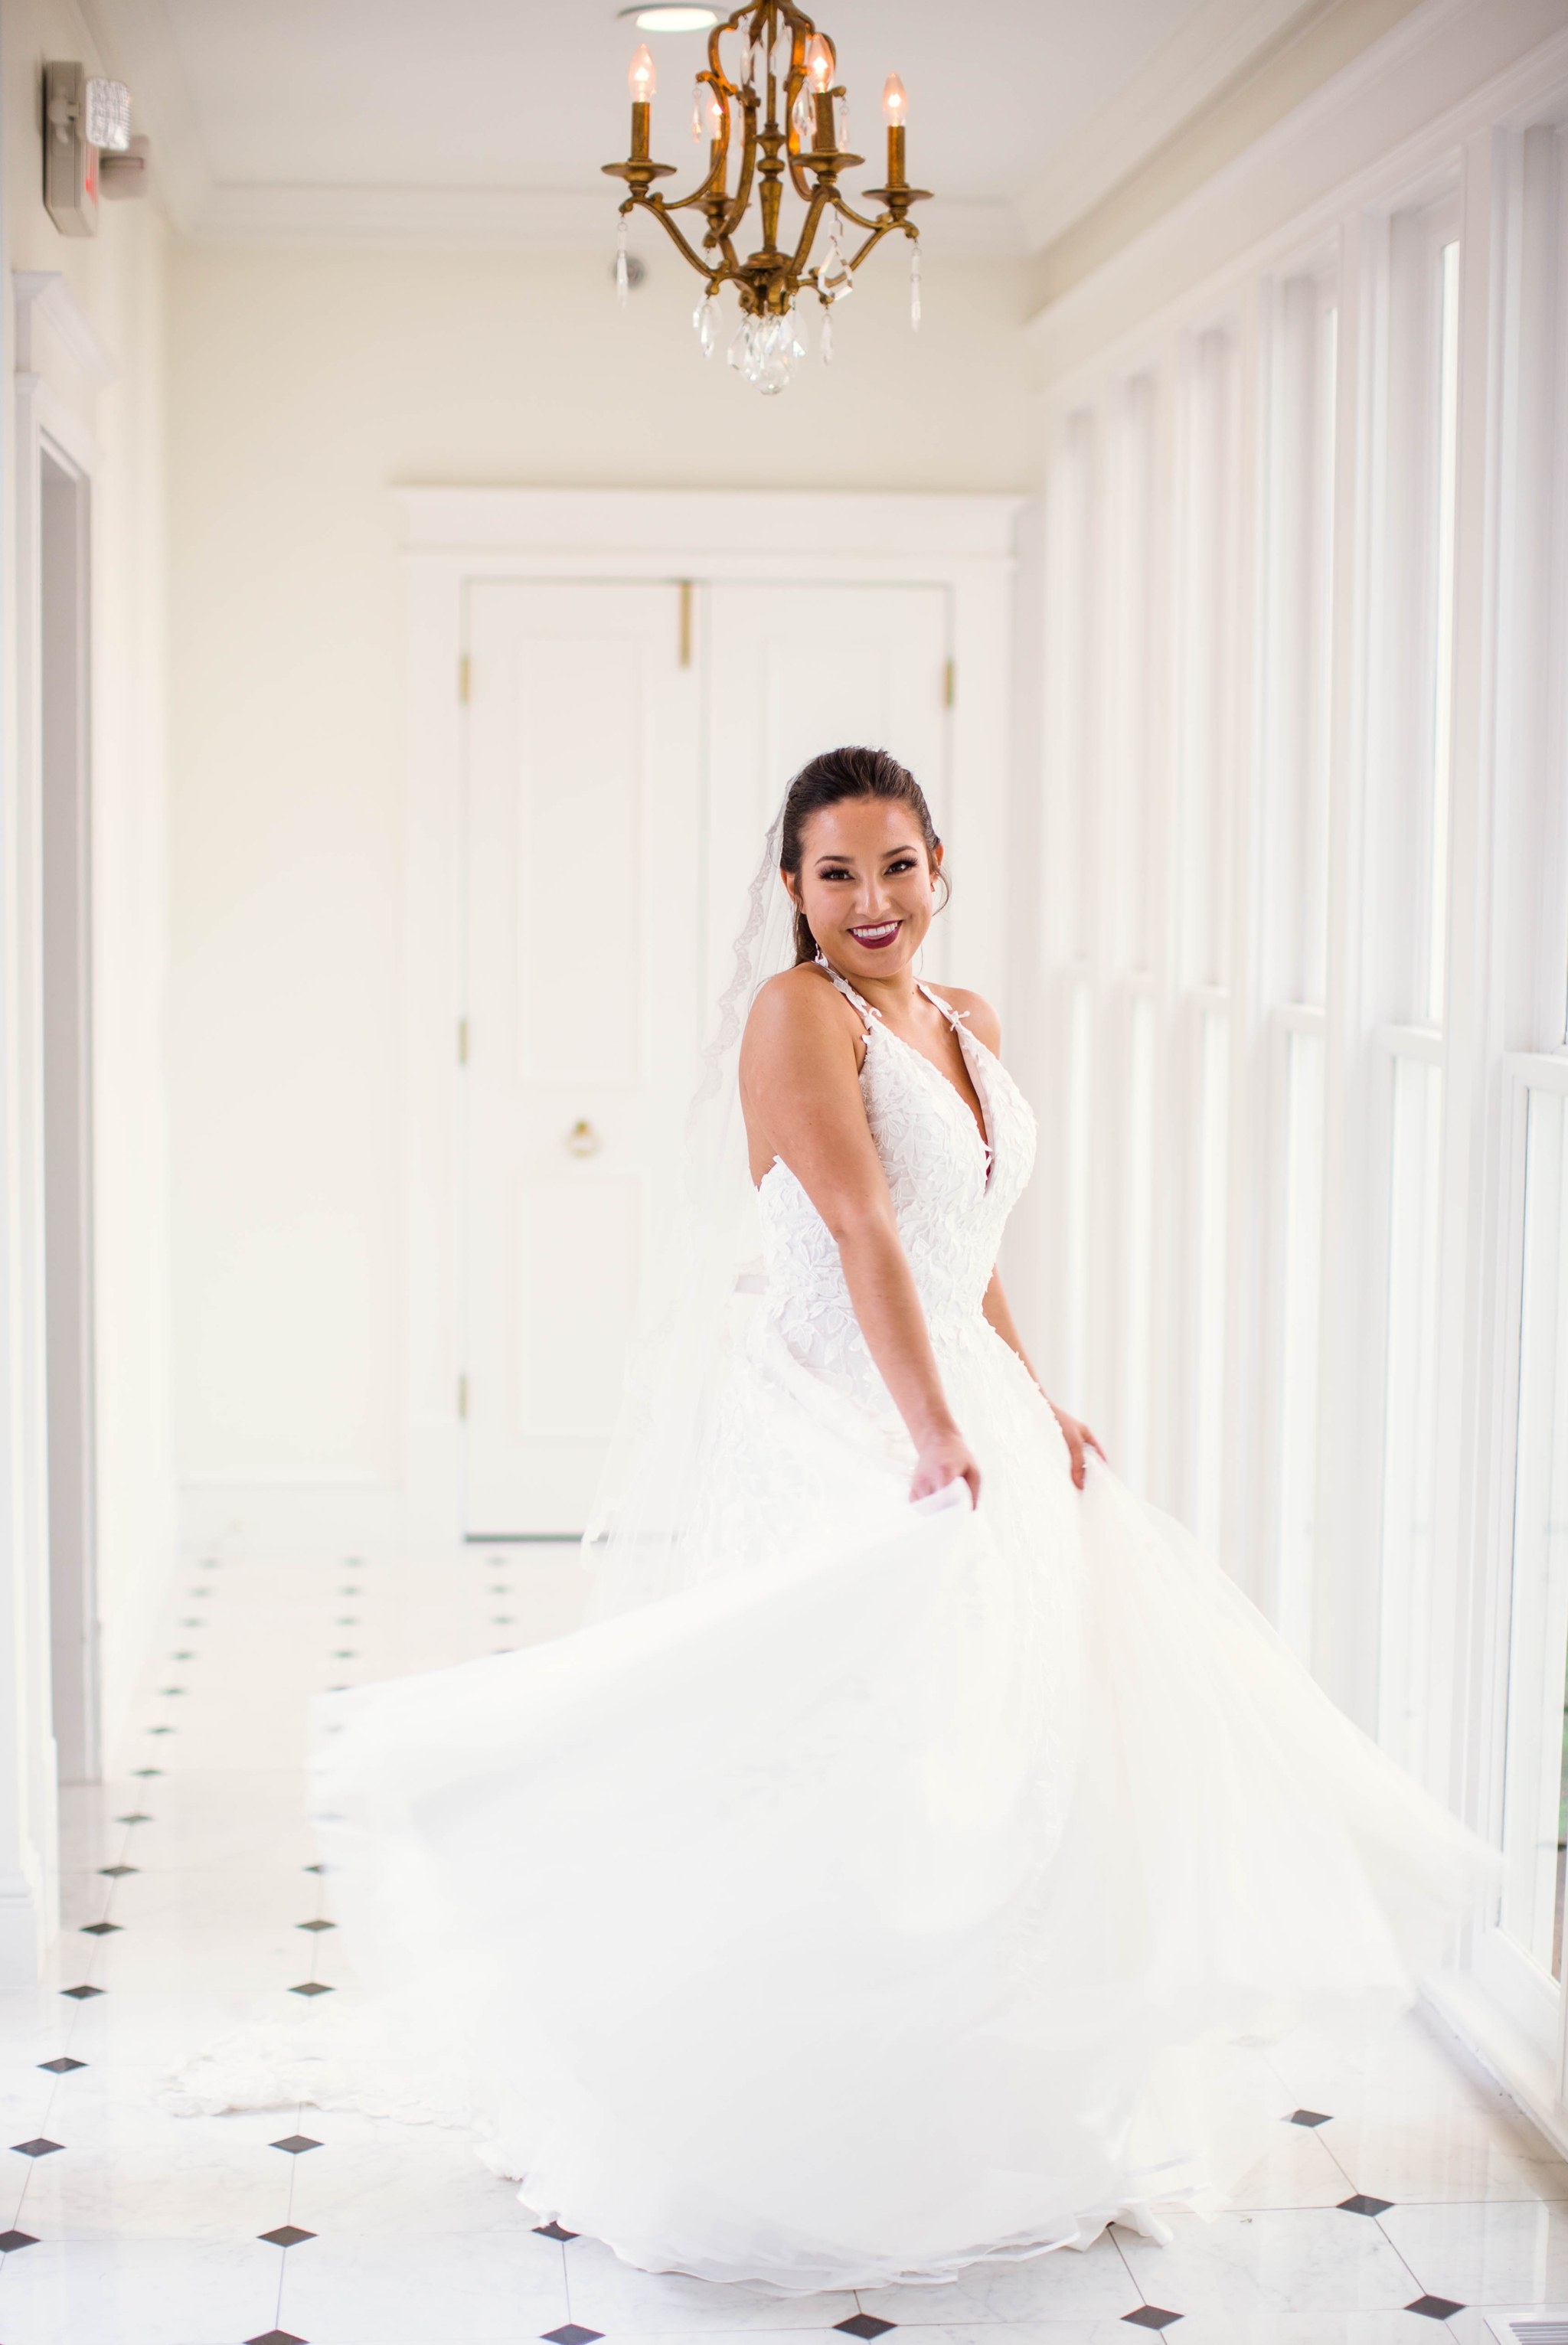  Natural light Bridal Portraits in an all white luxury estate venue with black and white floors and a golden chandelier - Bride is wearing a Ballgown Wedding Dress by Sherri Hill - shot with available window light - Fine Art Wedding Photographer in H